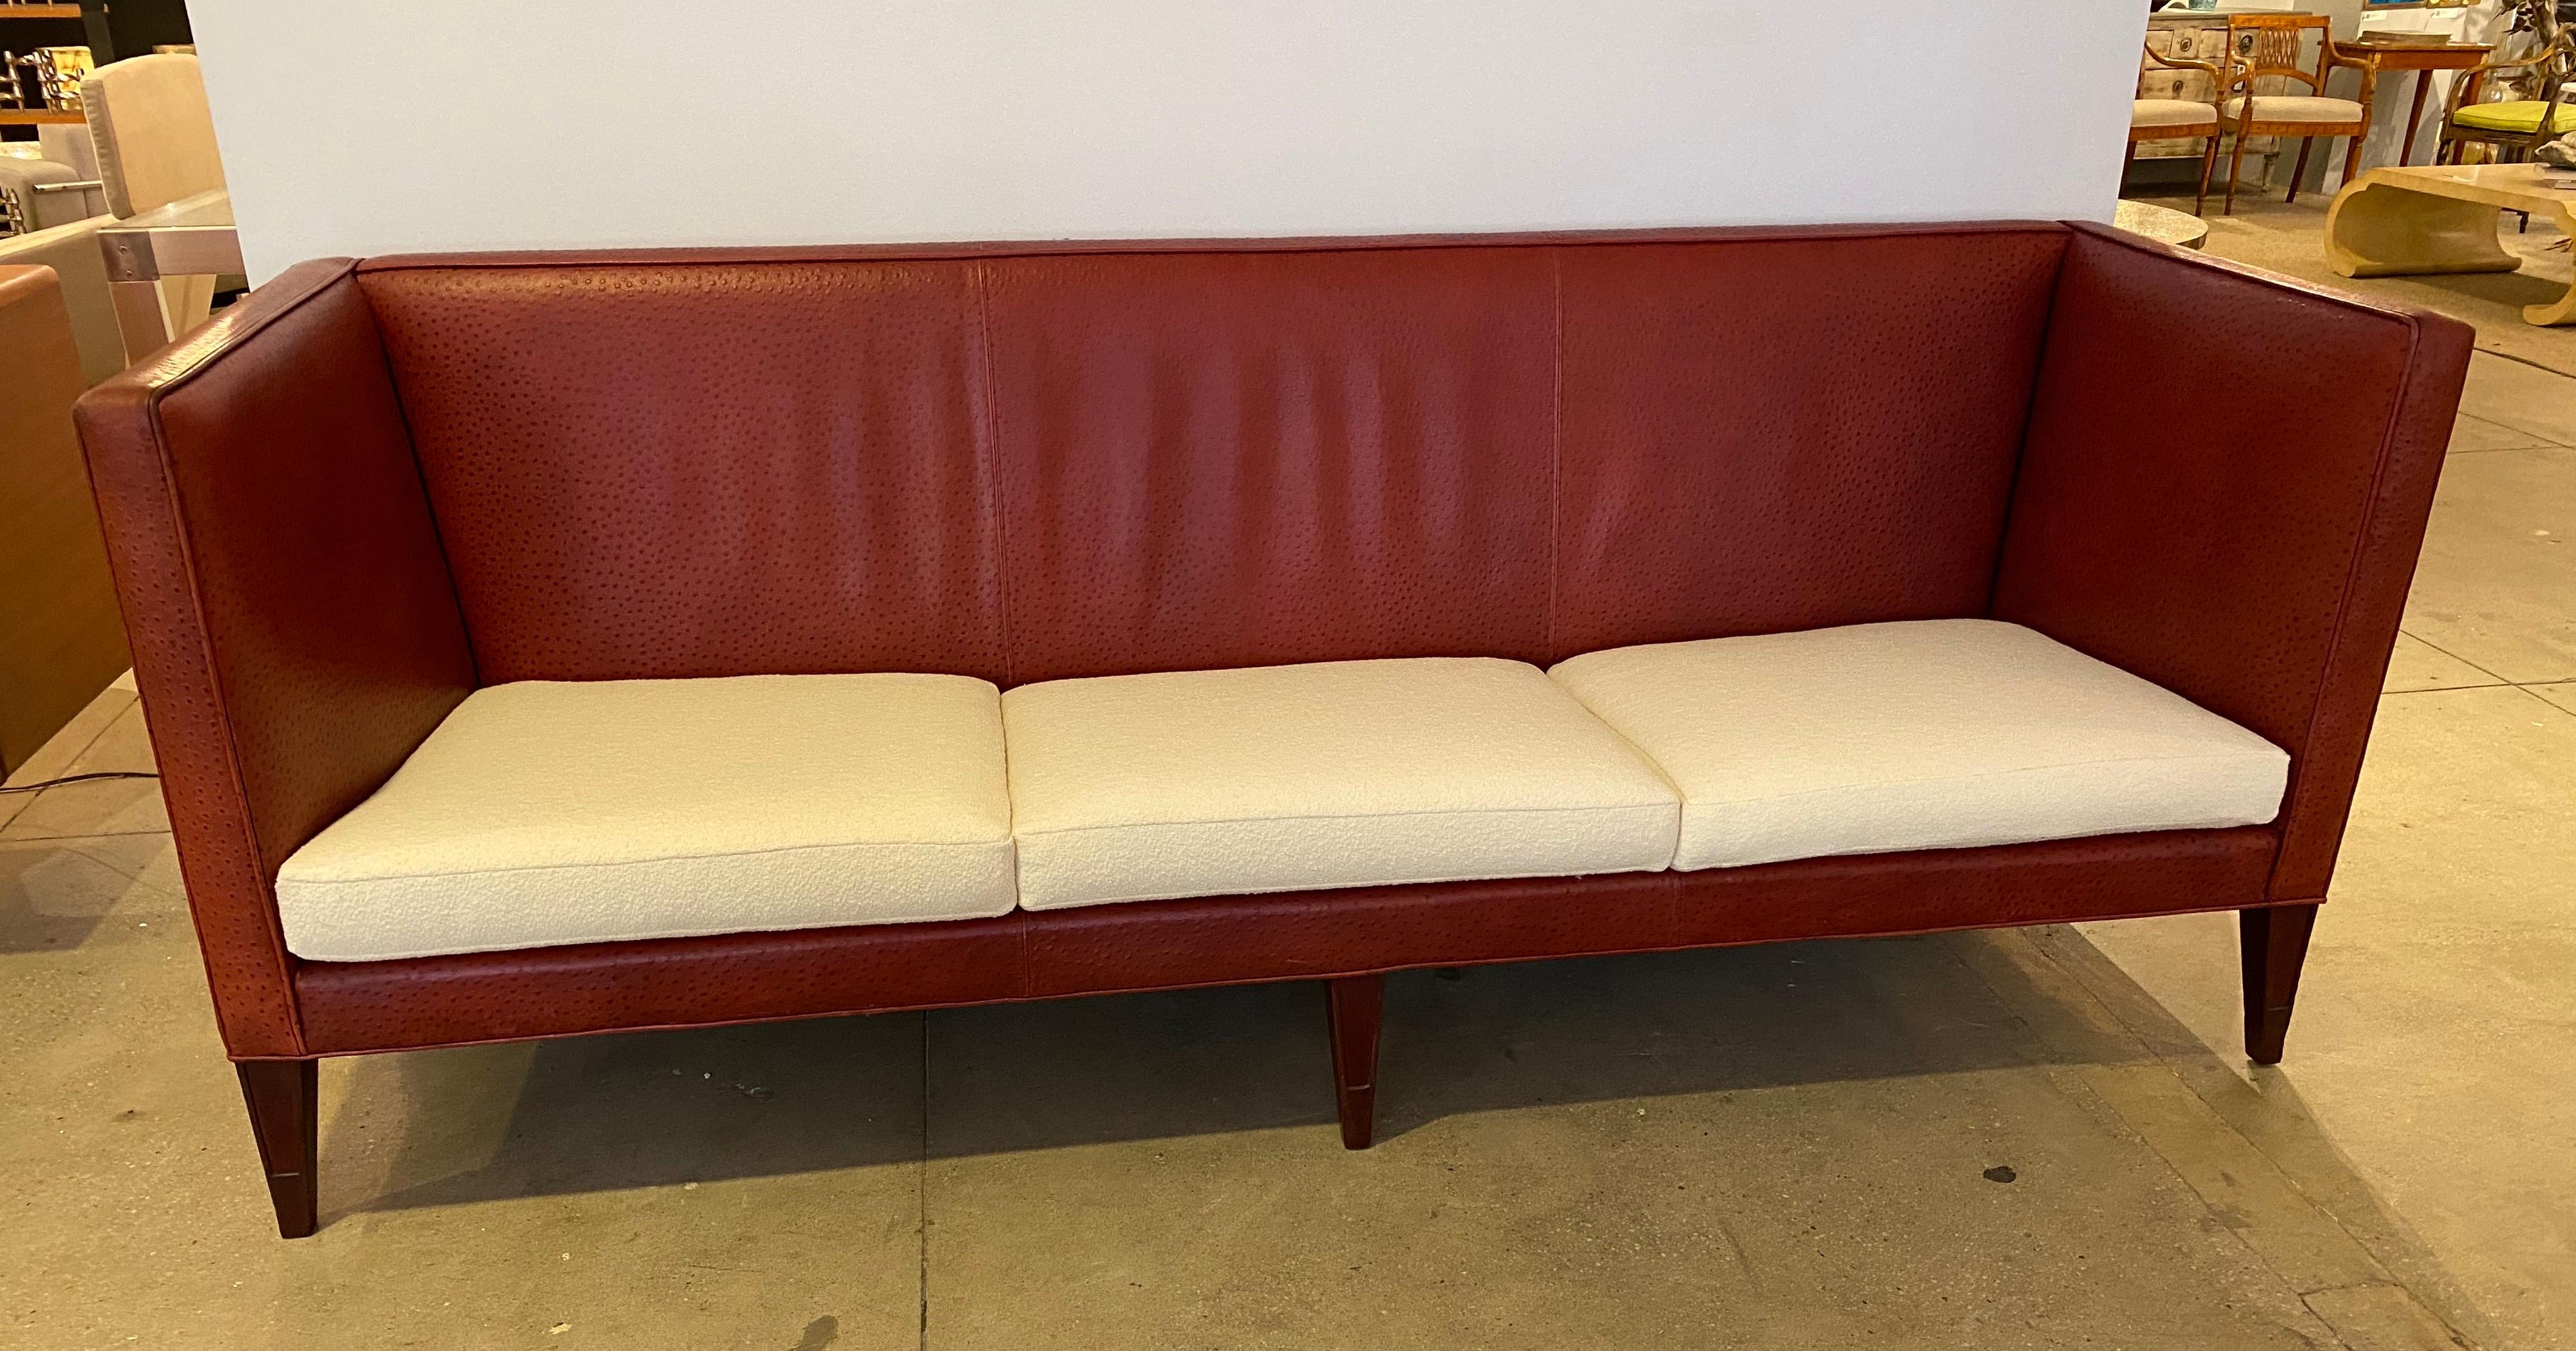 Philippe Starck Redwood Room Clift Hotel Leather Sofa 6